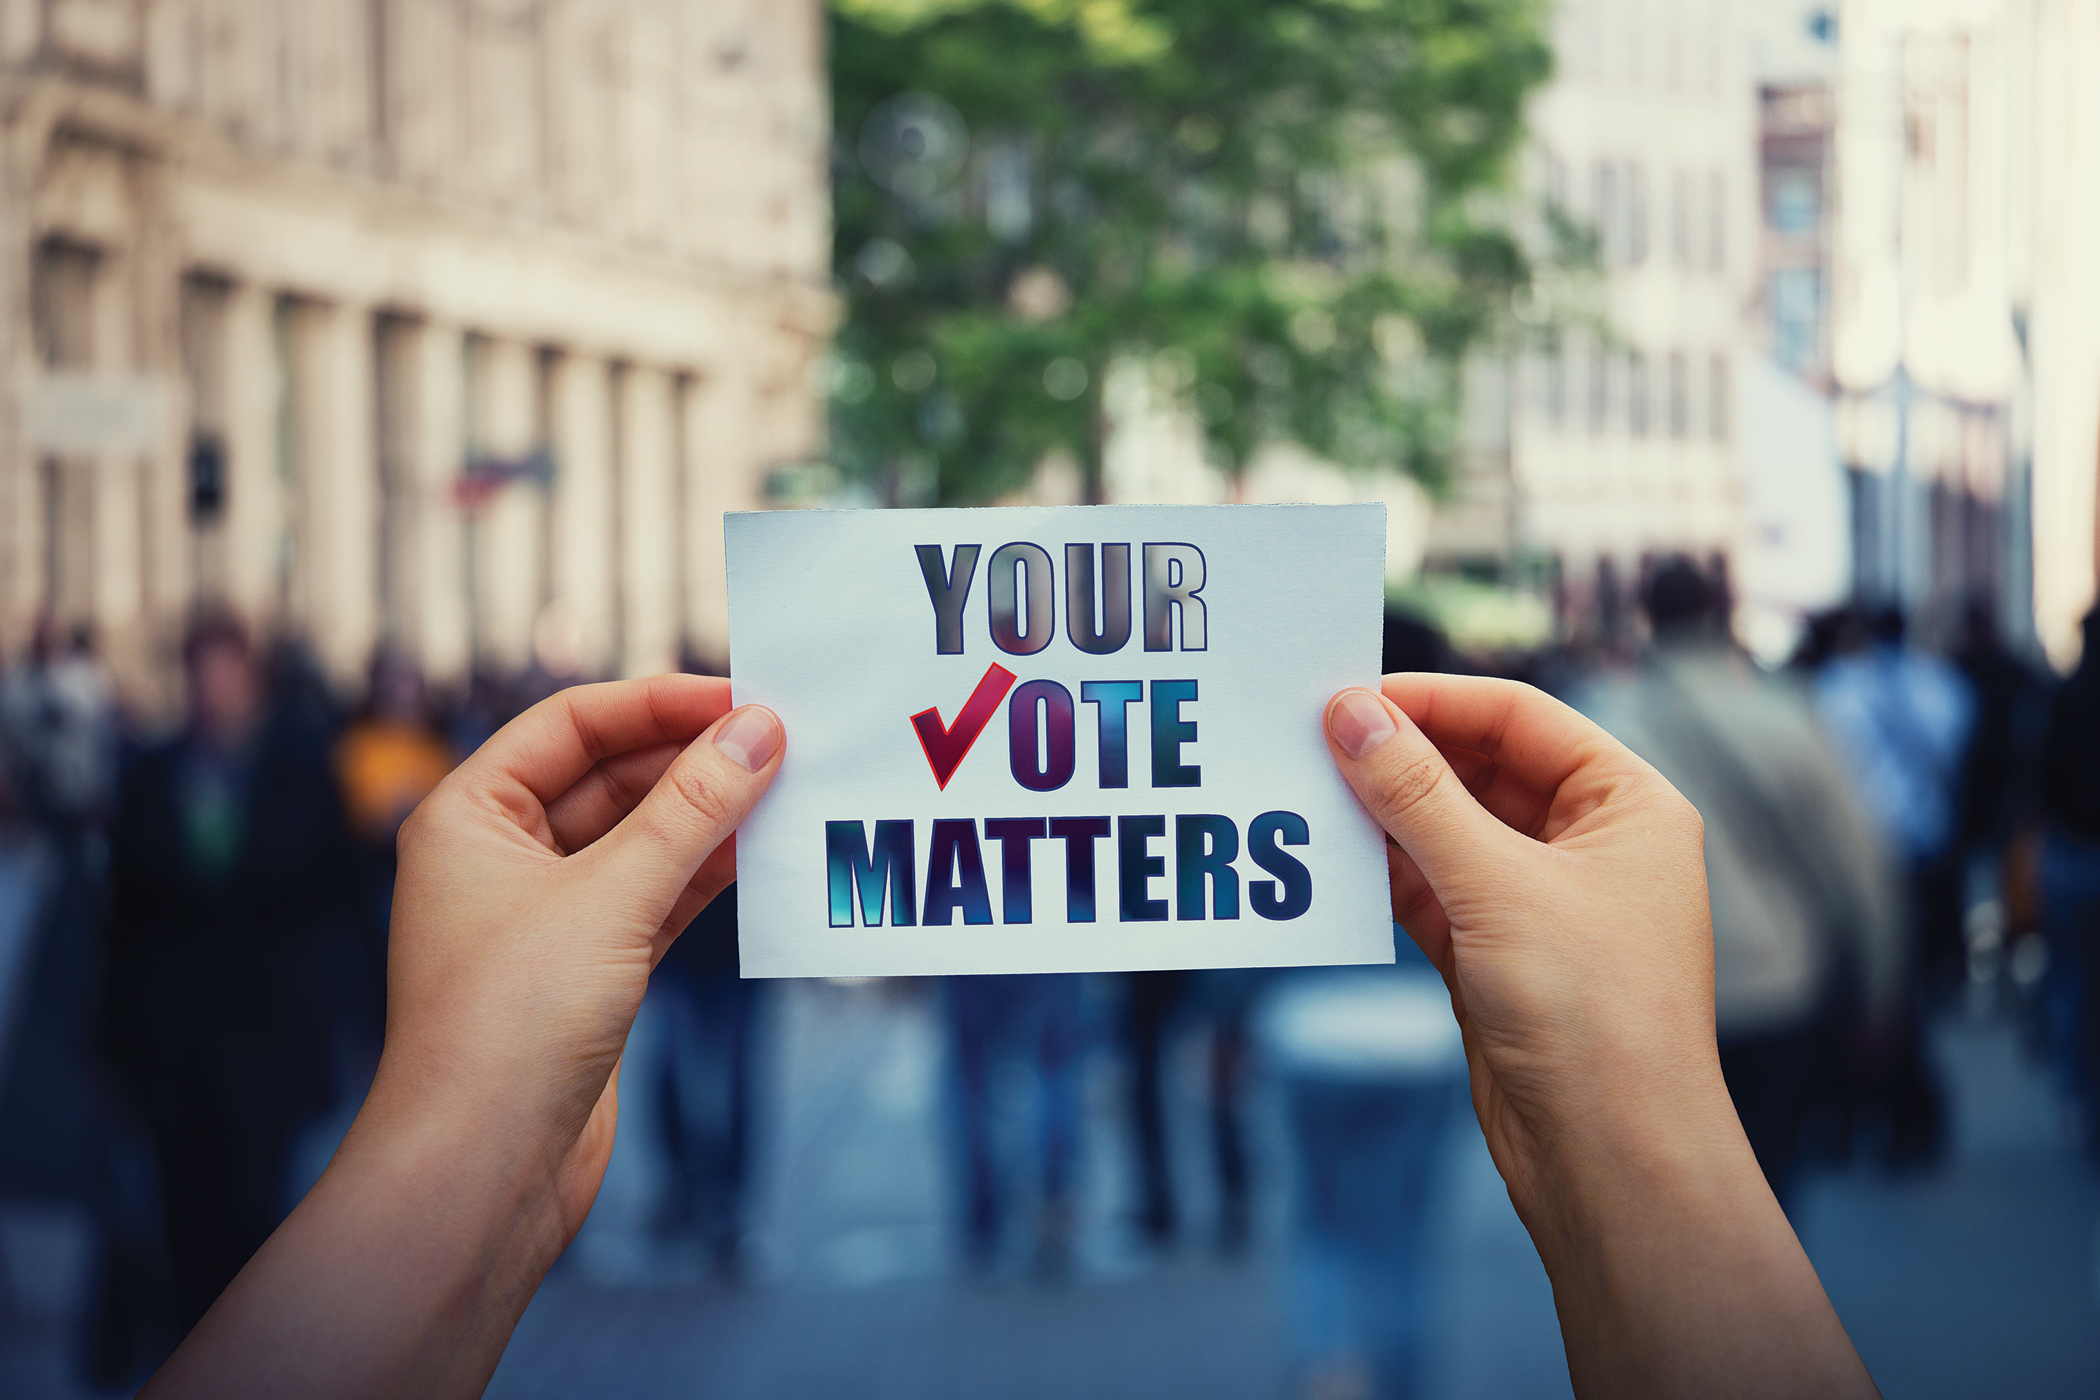 Hands hold a piece of paper with the message "Your Vote Matters"